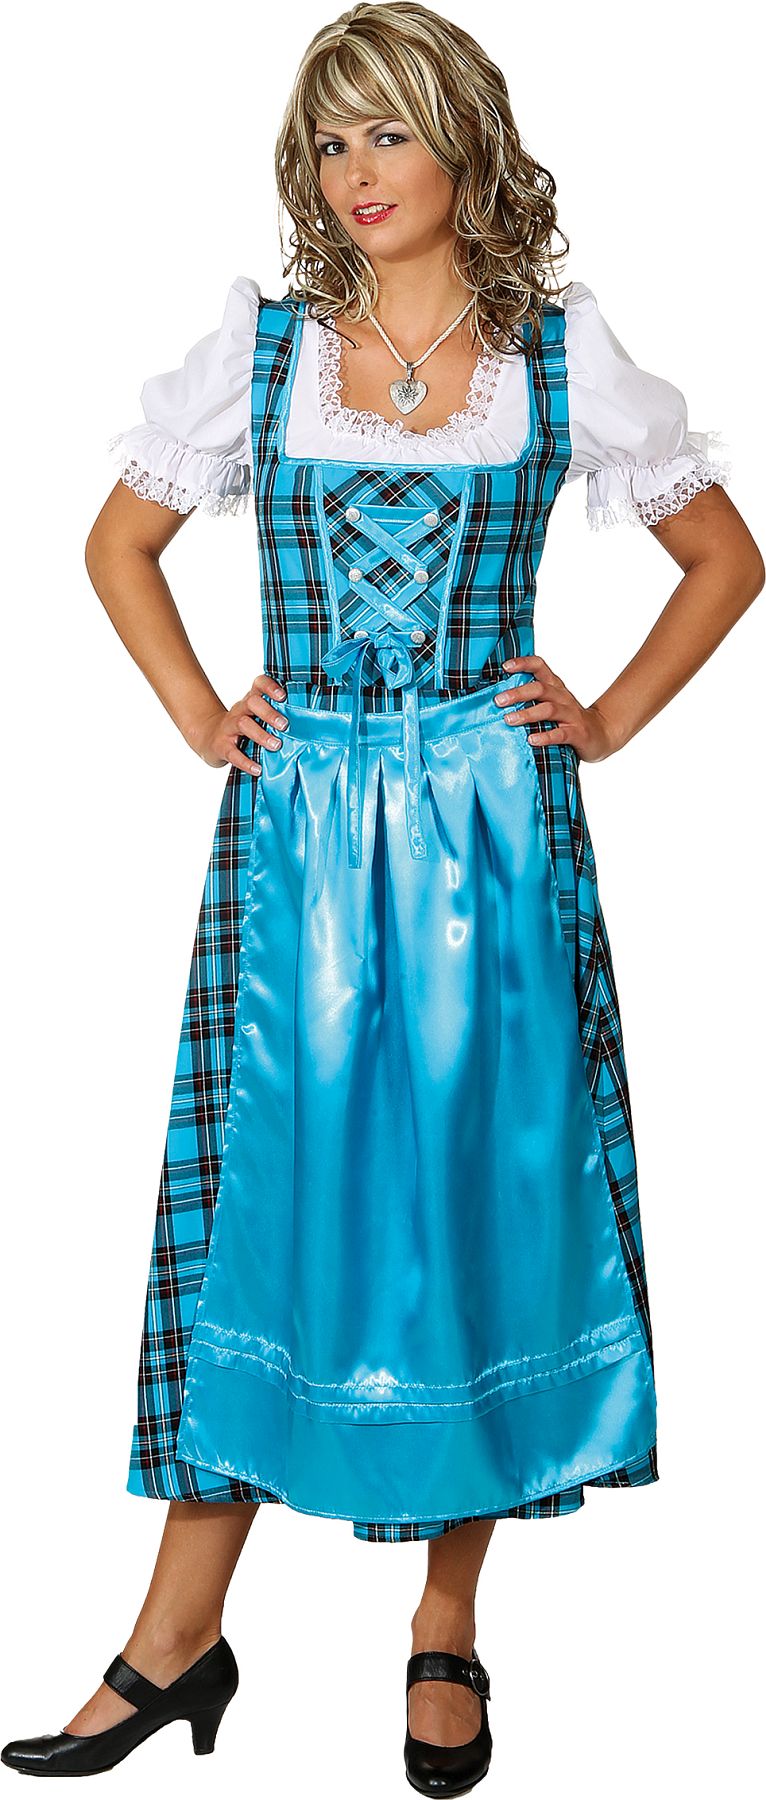 Dirndl long checkered turquoise
Traditional bavarian dress